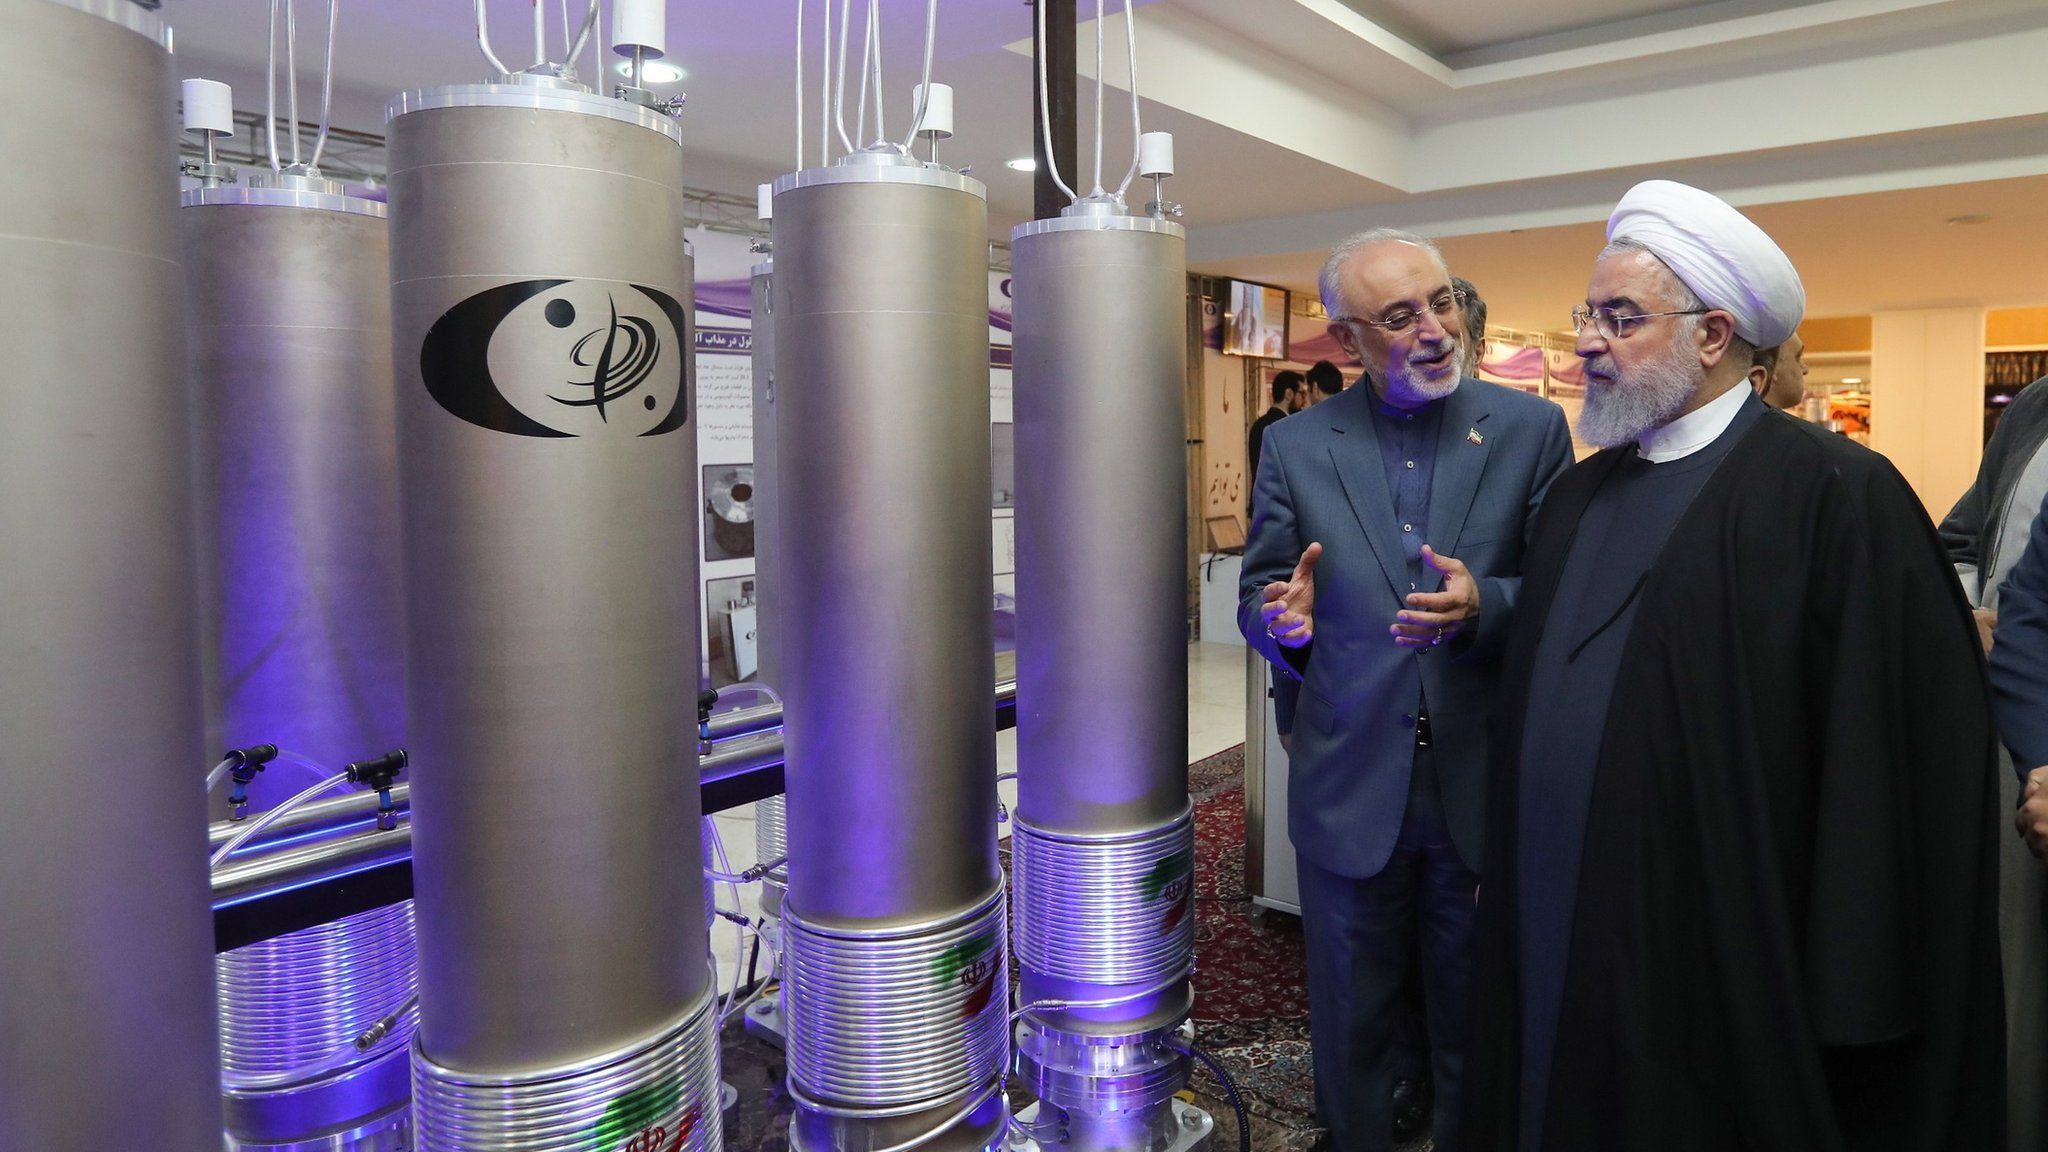 File photo showing Iranian President Hassan Rouhani (R) inspecting nuclear technology in Tehran (9 April 2019)